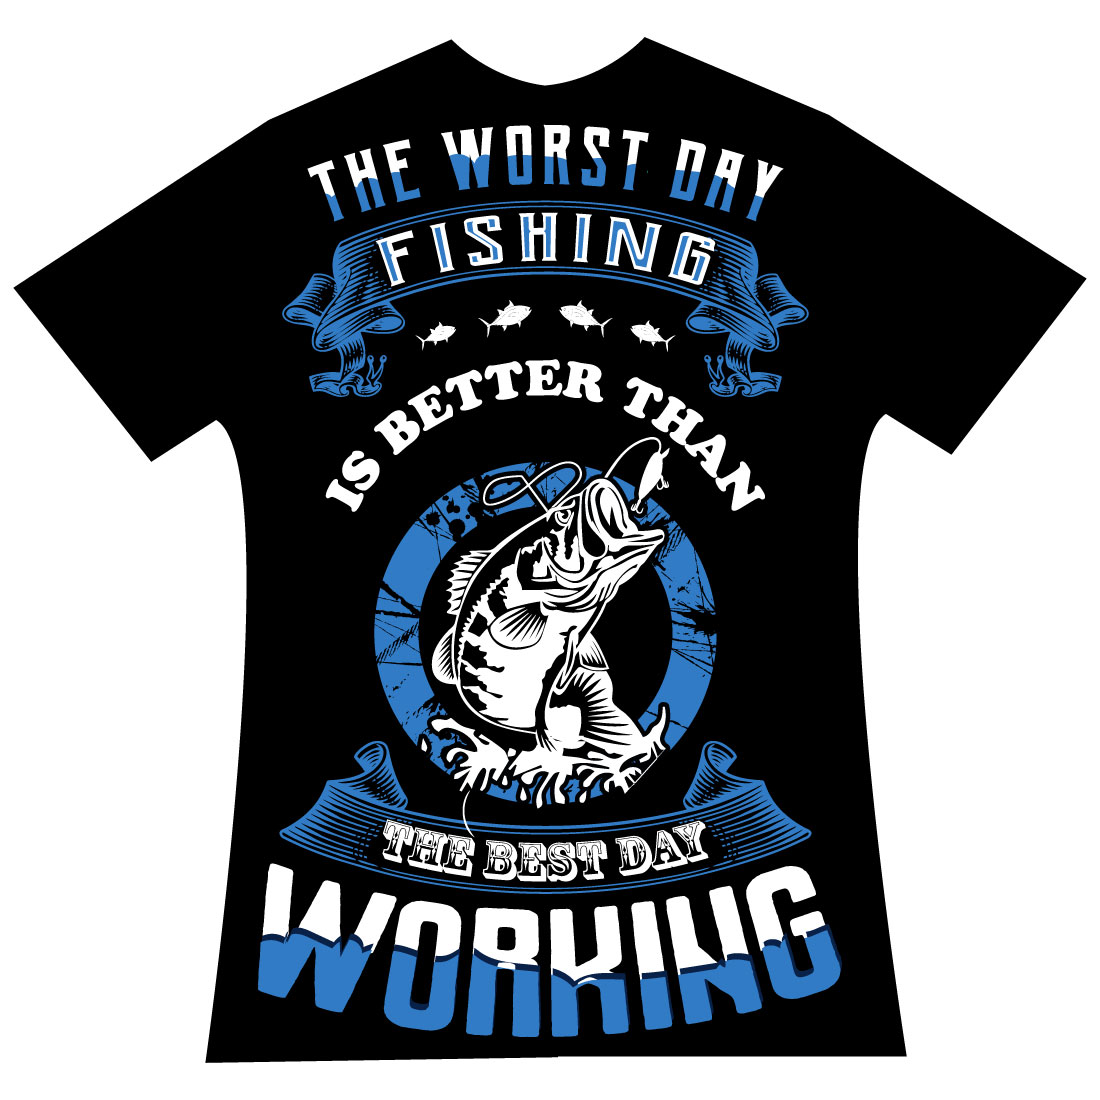 Fishing Is Better Than Working T-shirt Design cover image.